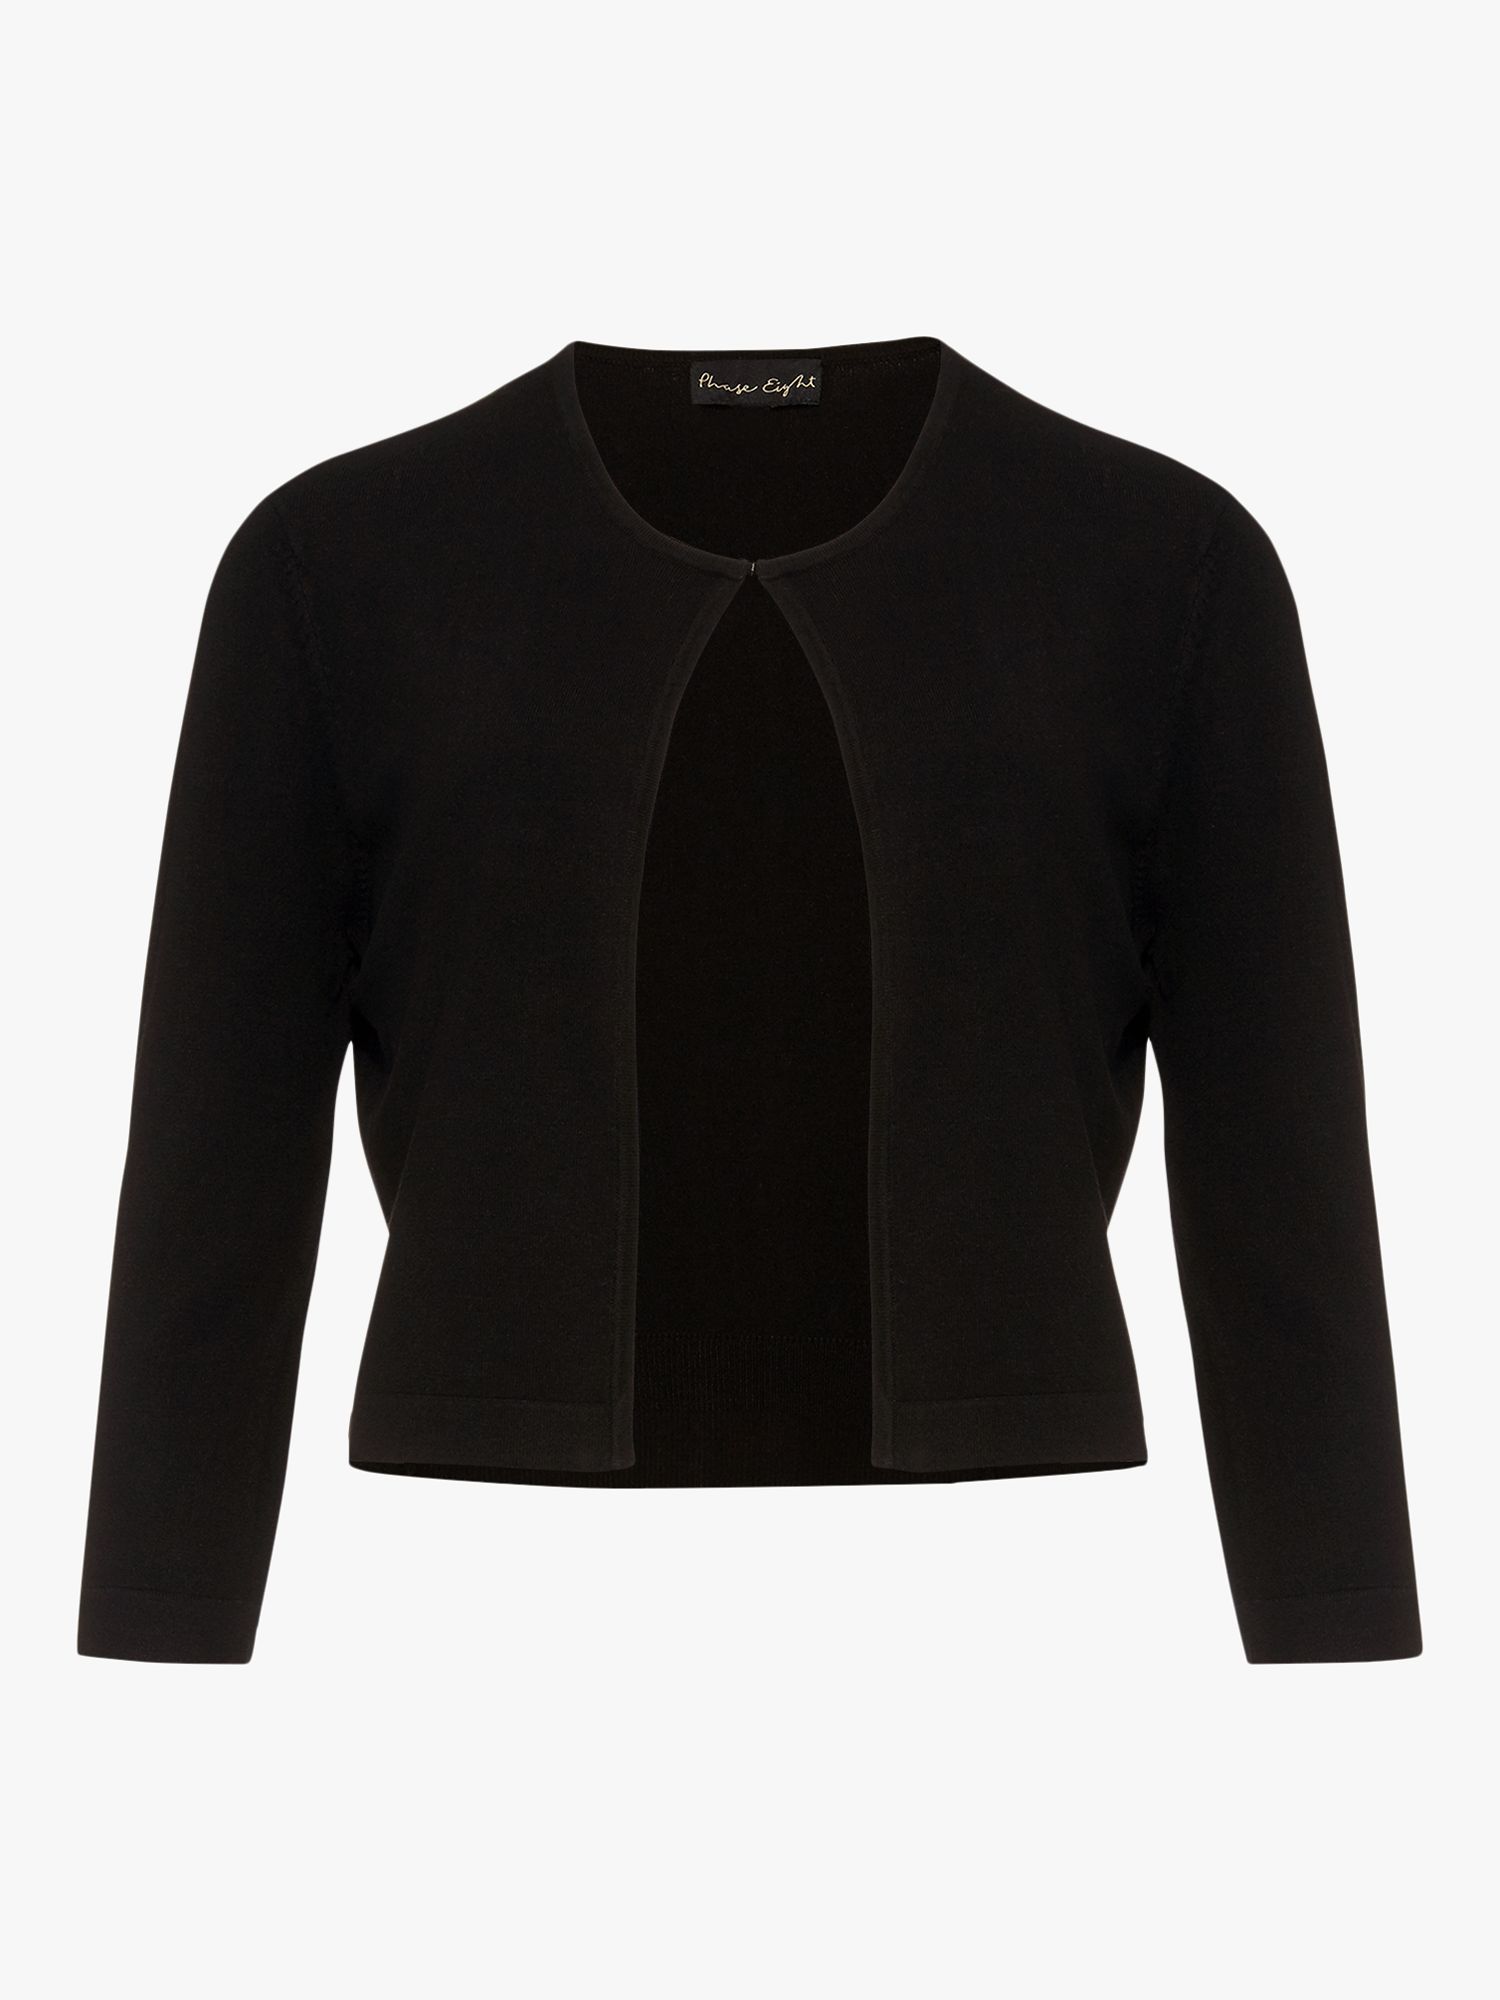 Phase Eight Catie Cardigan, Black at John Lewis & Partners